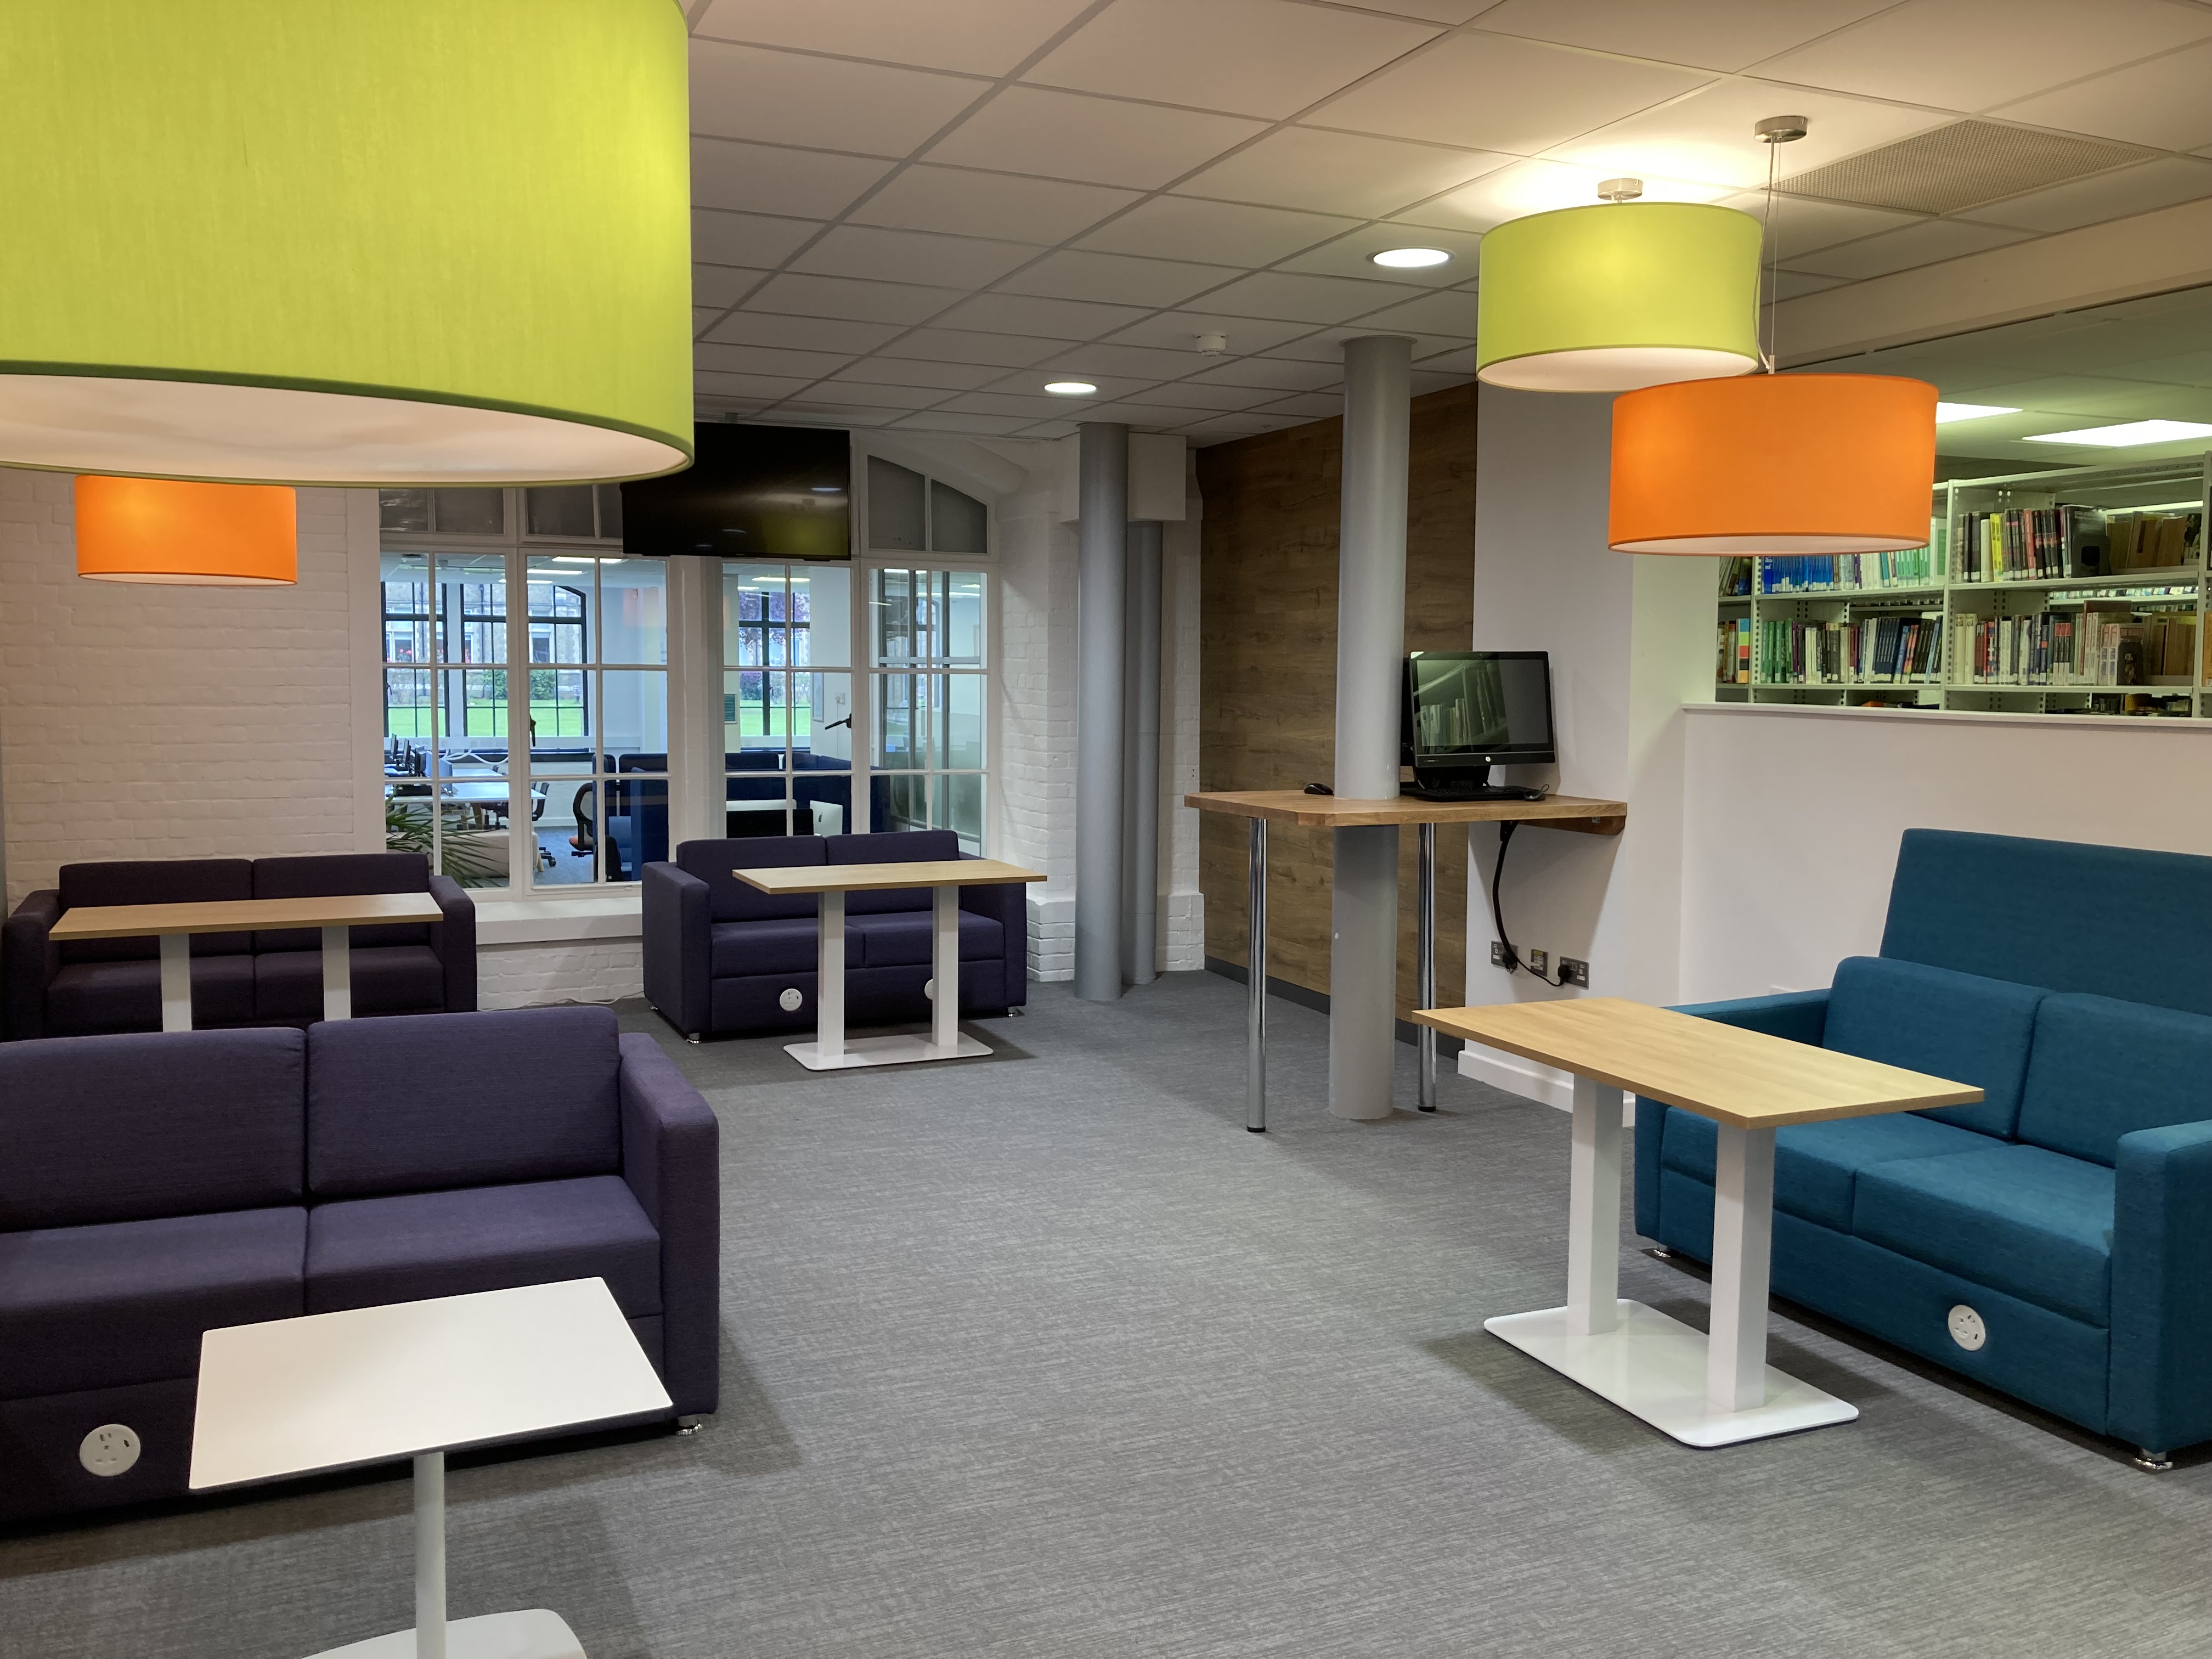 View of the completed Student Hub looking towards the sofas